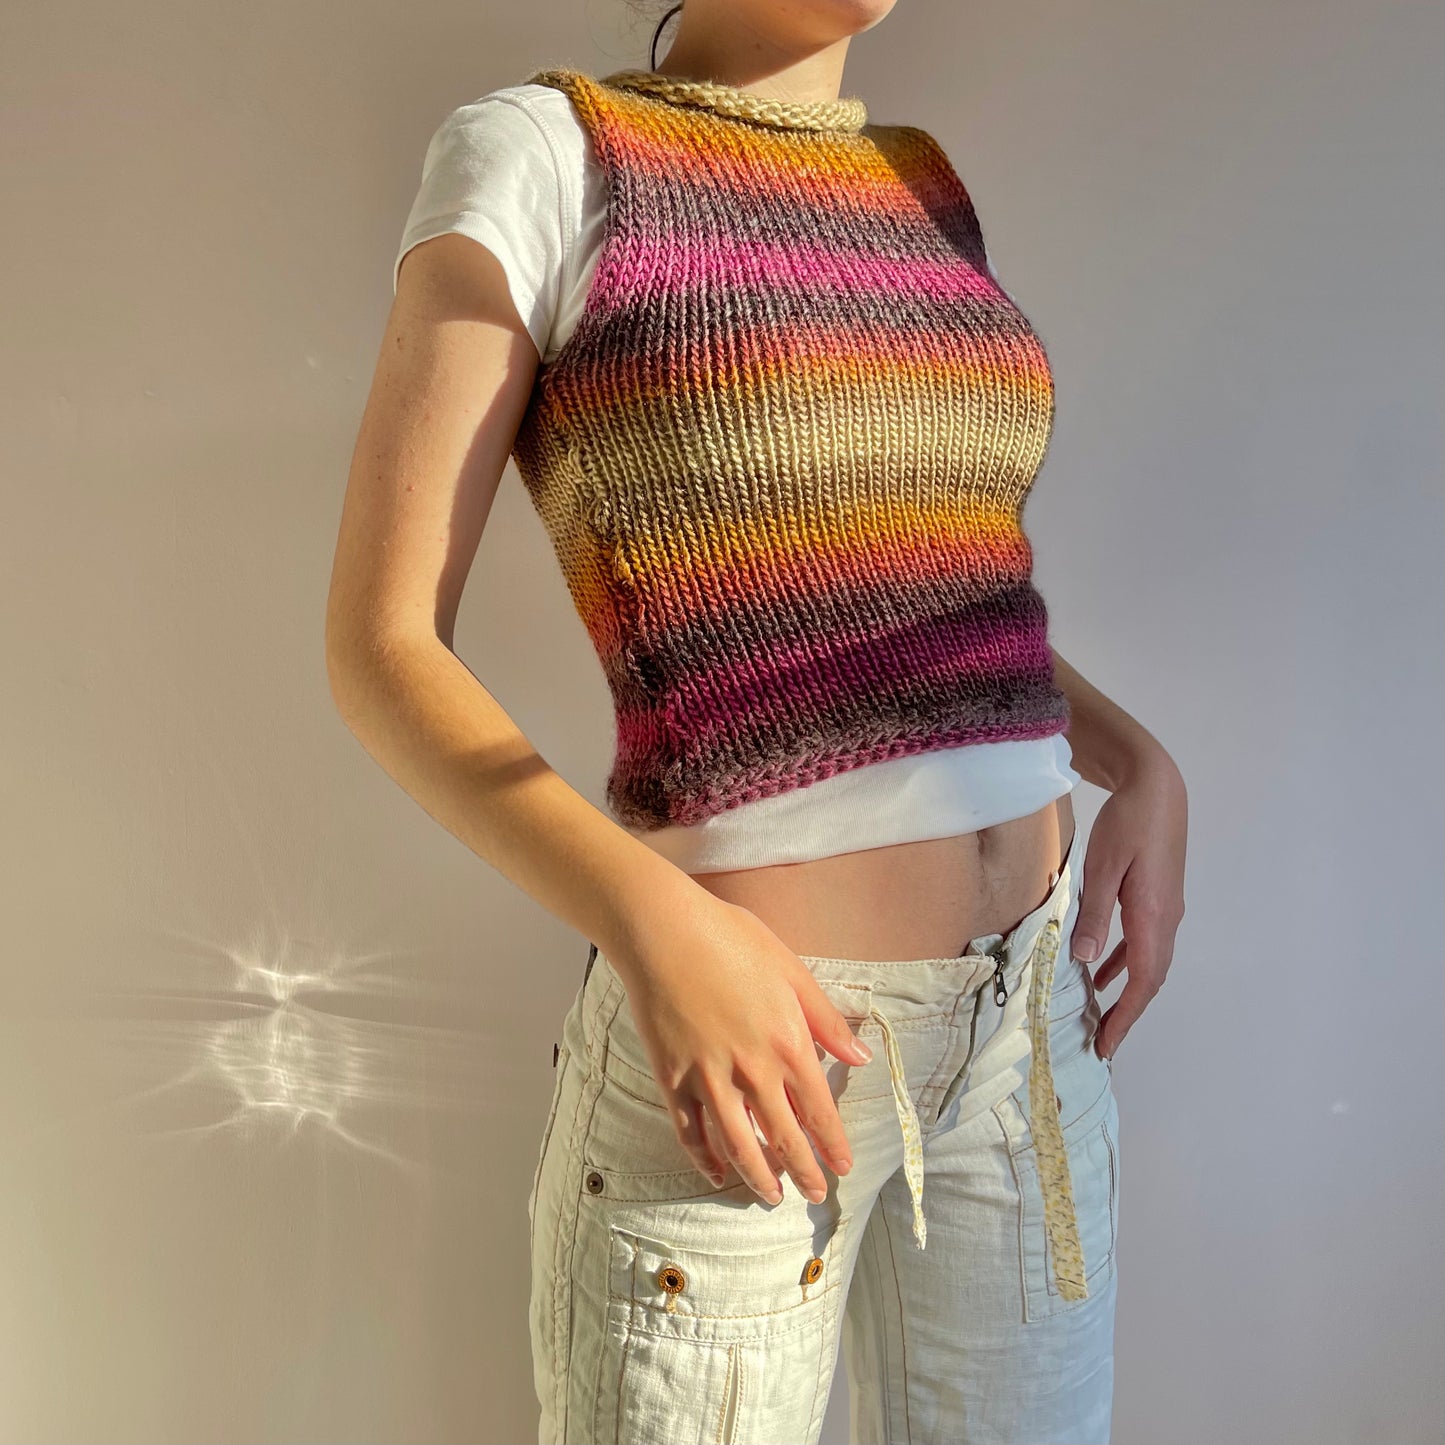 The Sunset Shades Vest - handmade knitted sweater vest